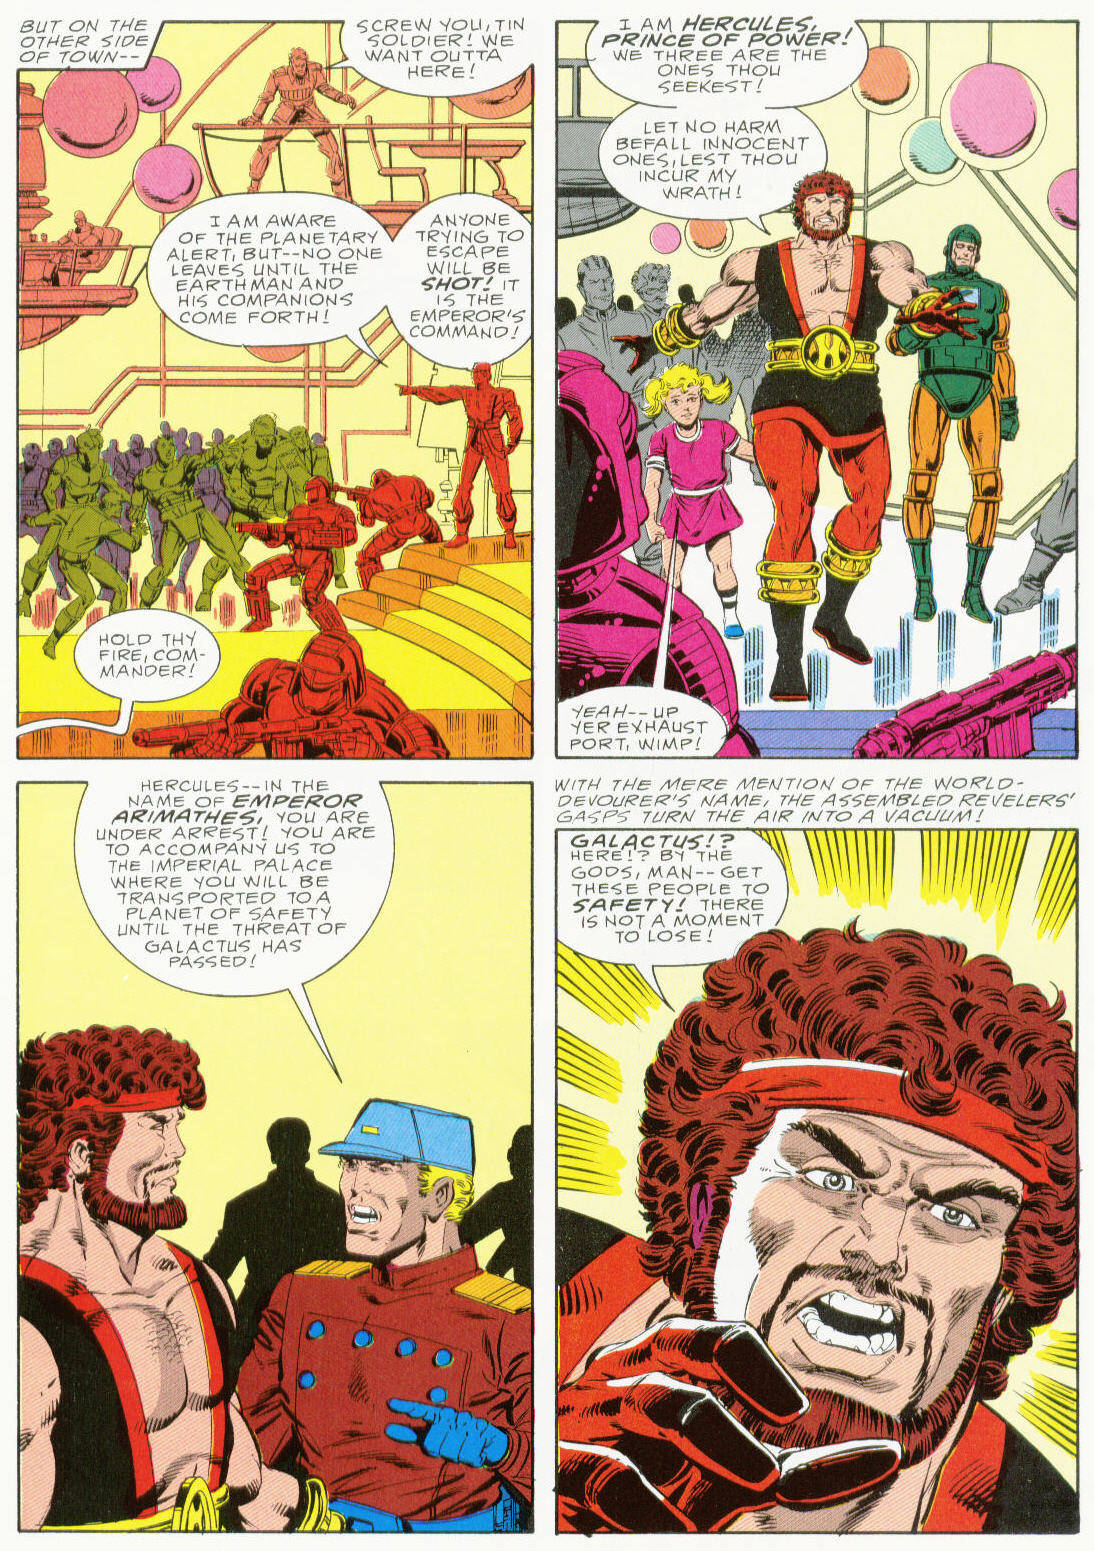 Marvel Graphic Novel issue 37 - Hercules Prince of Power - Full Circle - Page 21